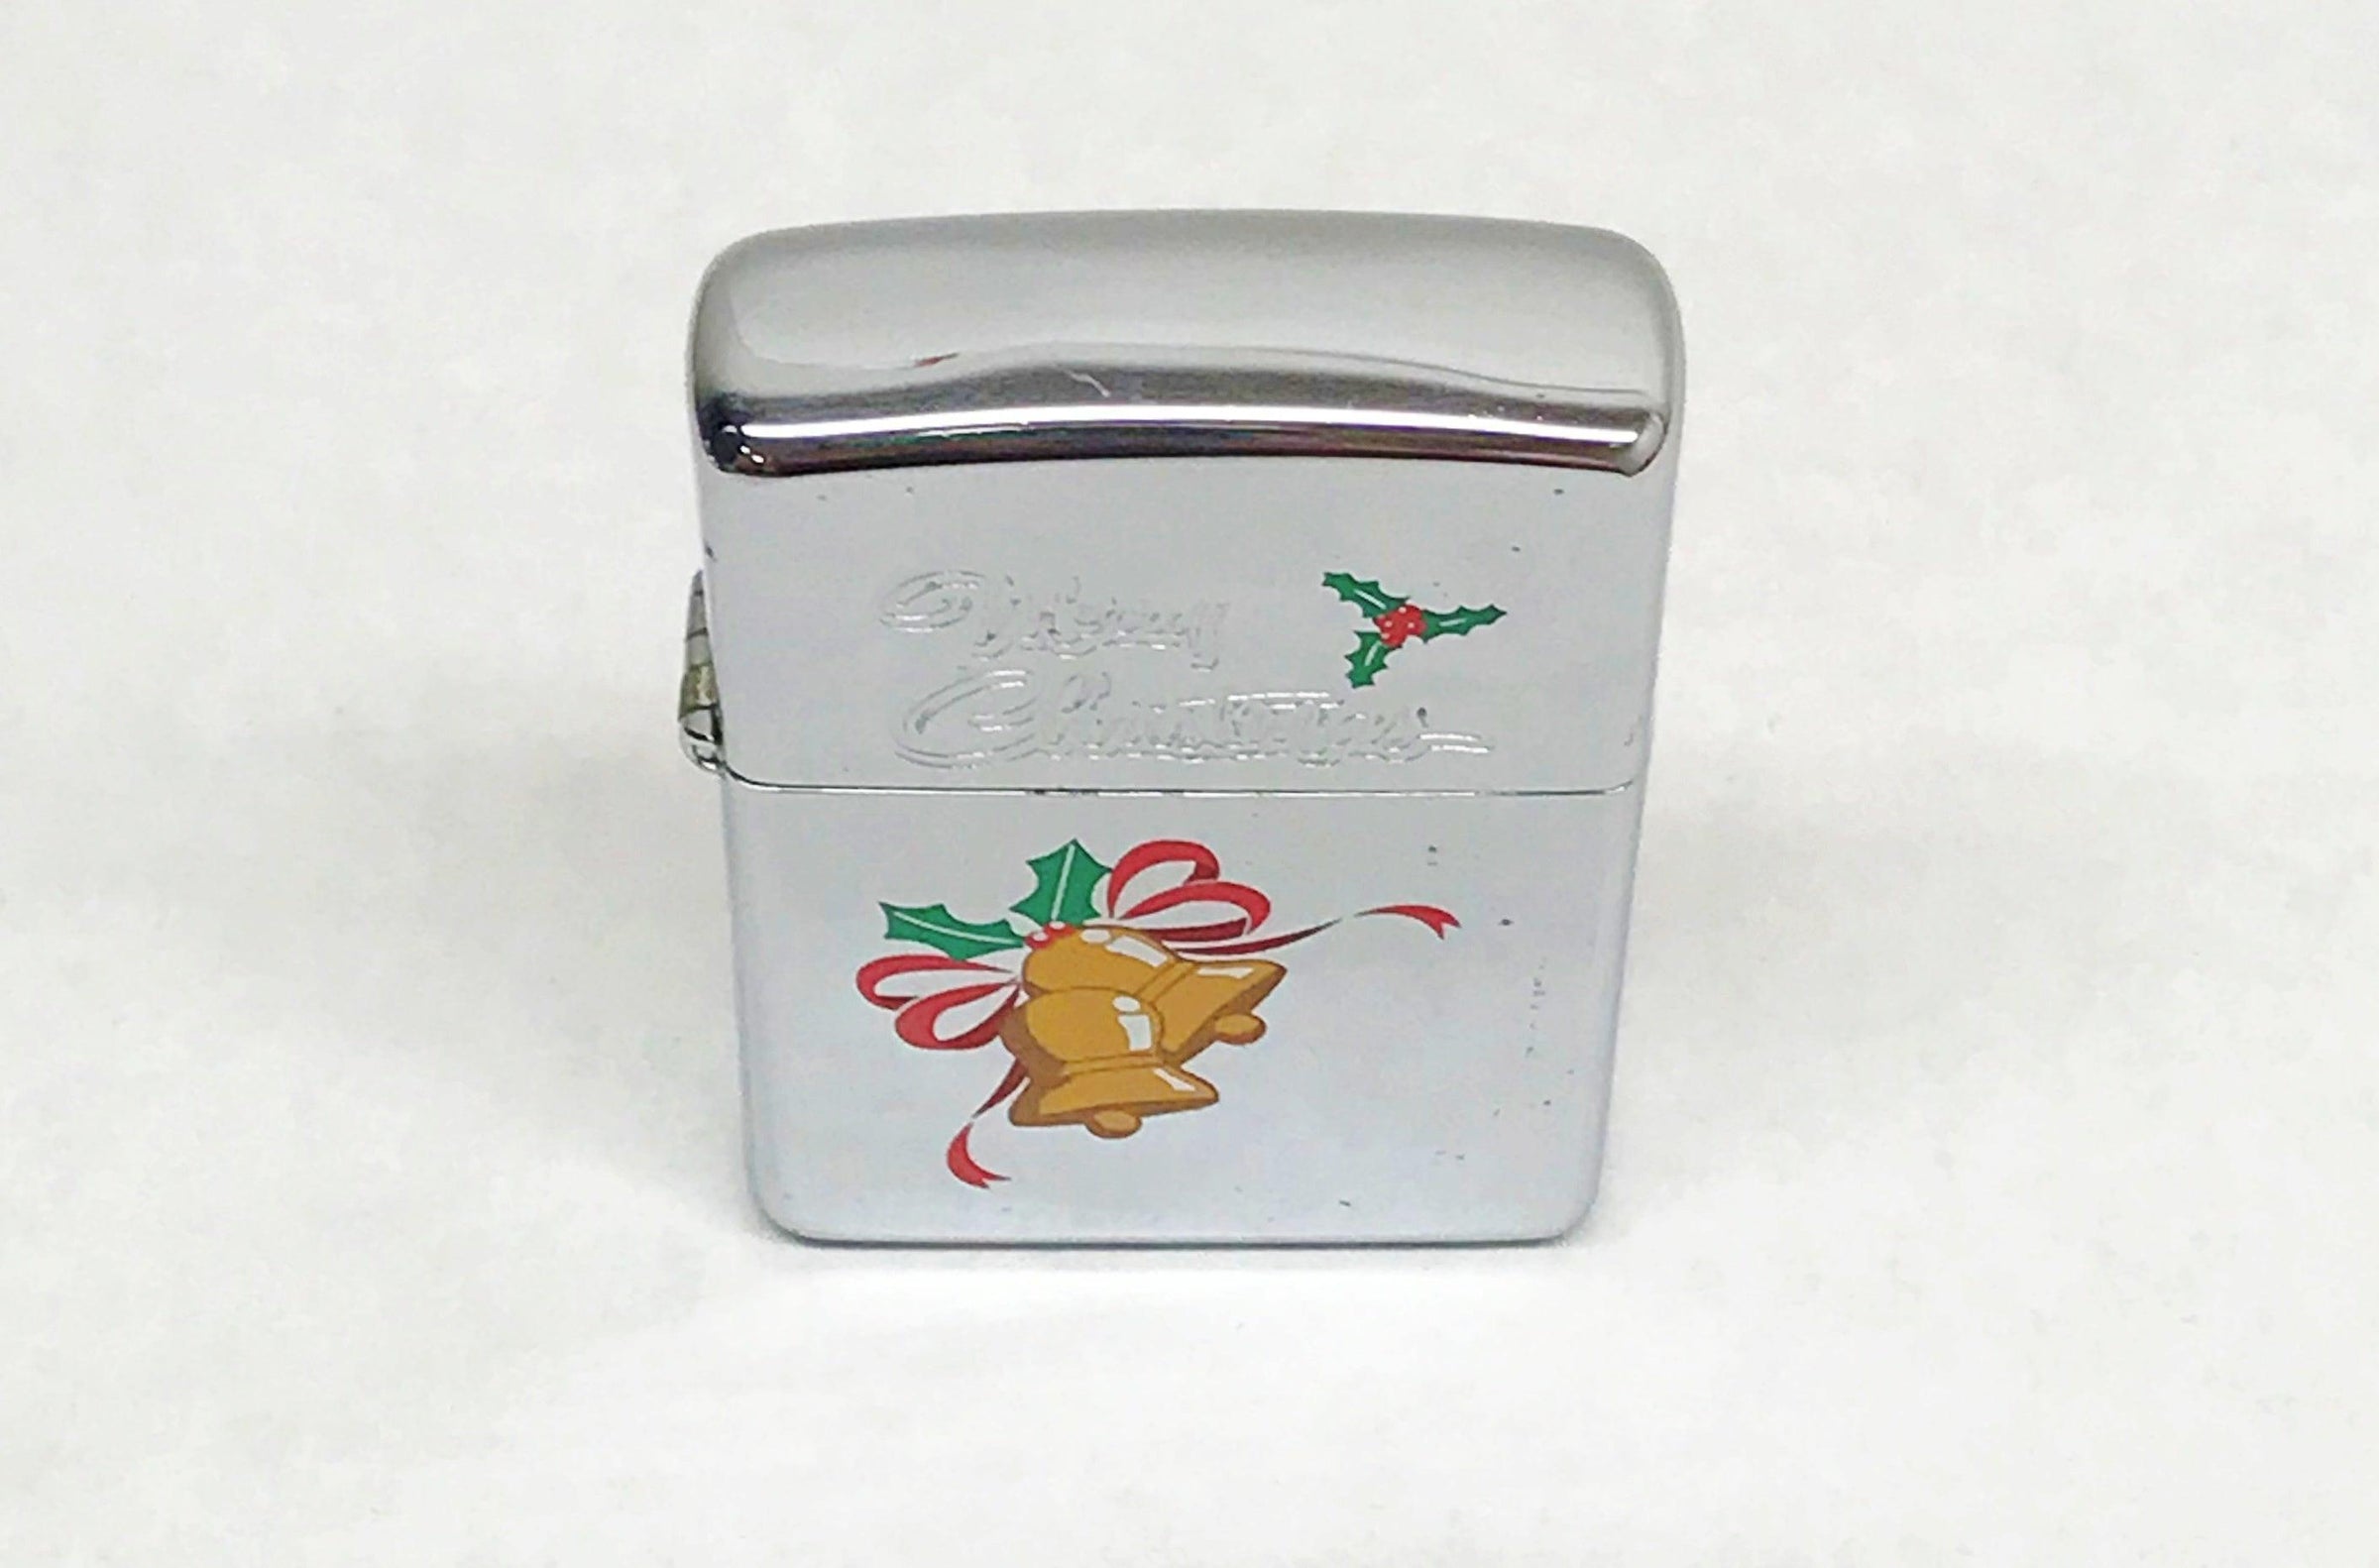 New XIII 1997 Merry Christmas Bell Zippo Lighter - Hers and His Treasures